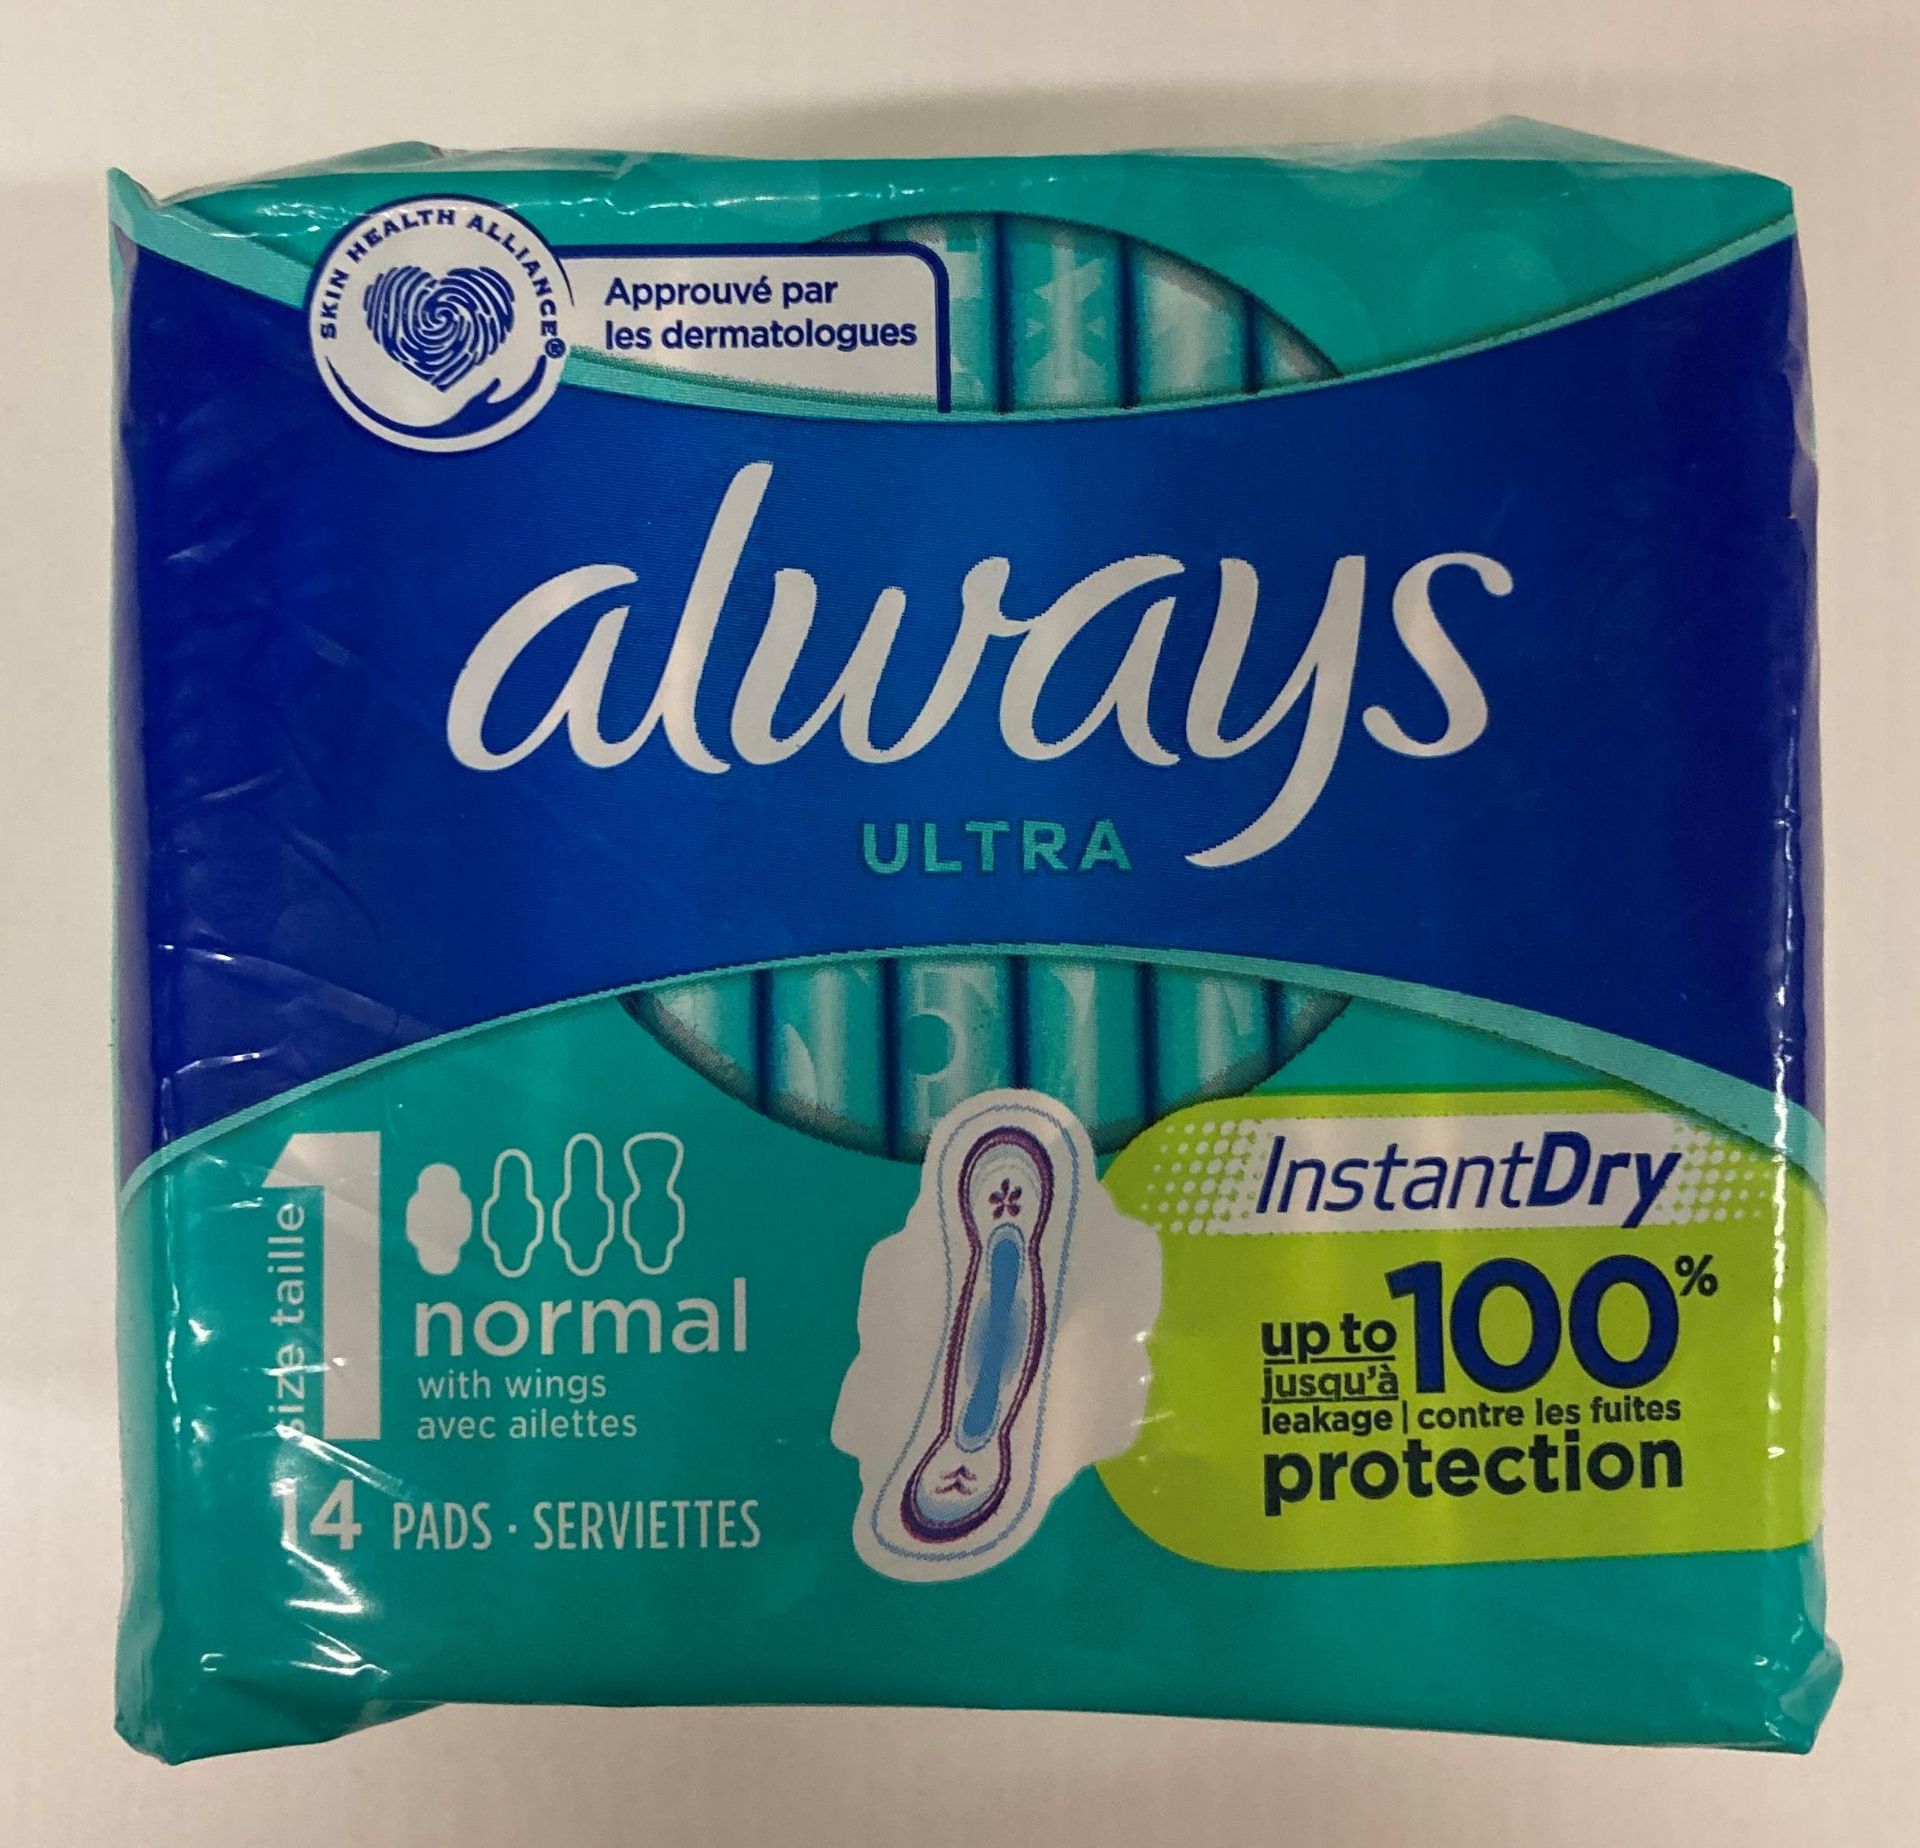 Contents to 2 boxes - 32 x packs of Always Ultra sanitary pads (size 1 - 14 per pack)) (saleroom